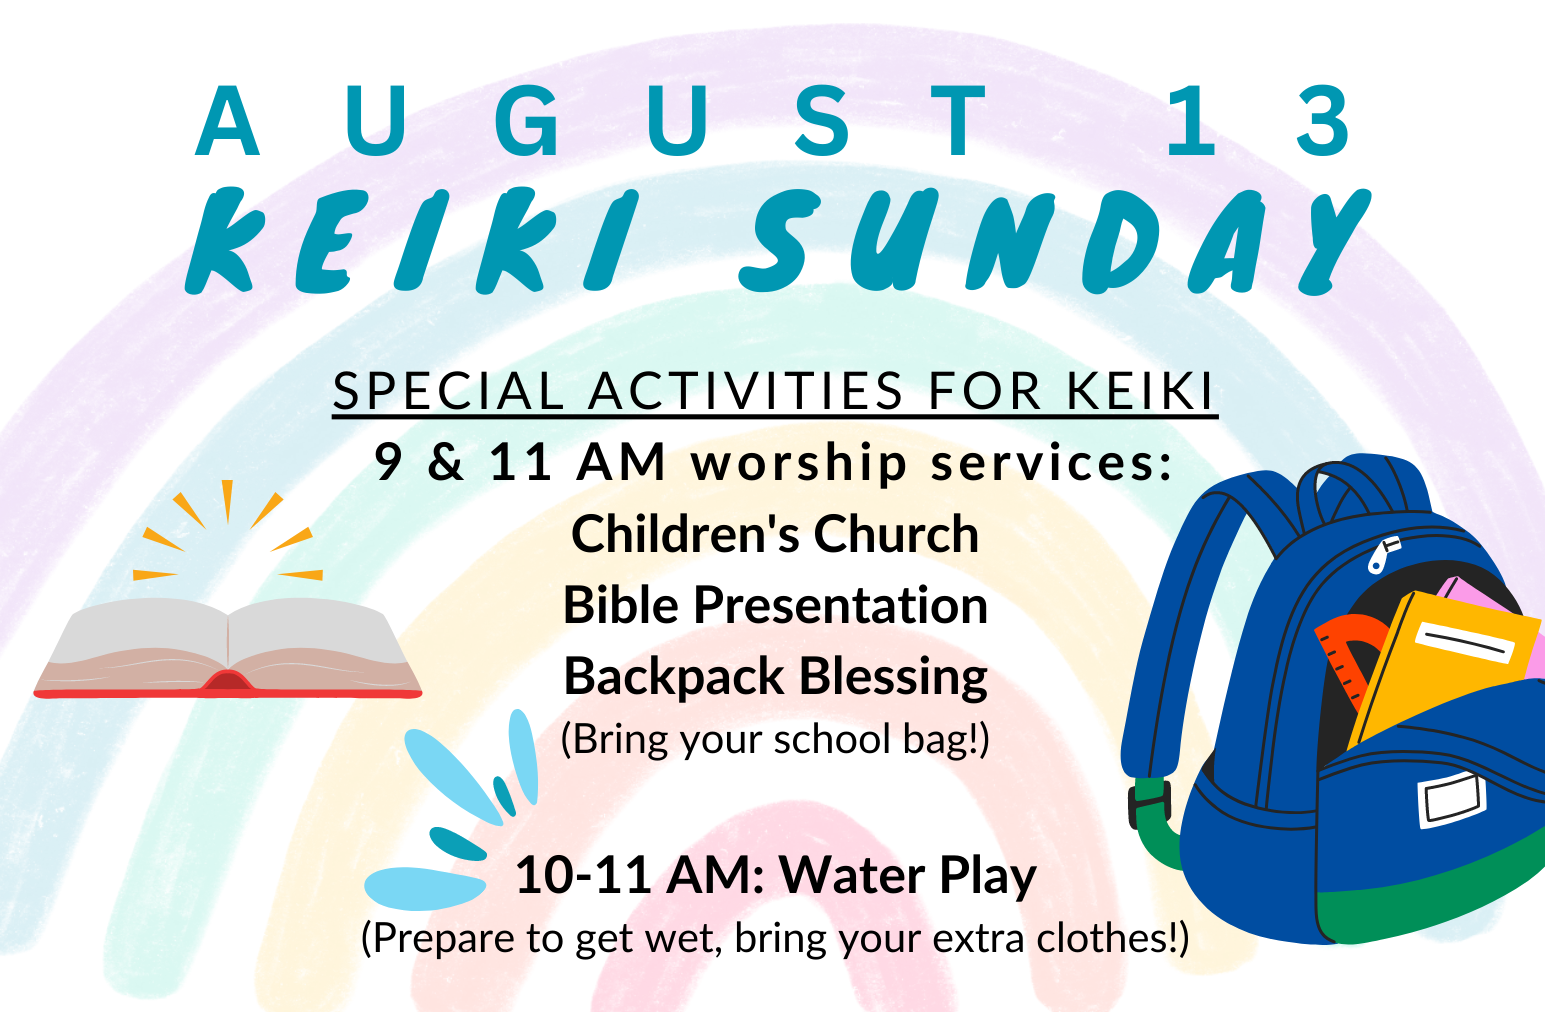 background is opaque painted rainbow with images of a bible backpack and water splash to accompany text which reads august 13 keiki sunday special activities for keiki 9 and 11 AM worship services children's church bible presentation backpack blessing and water play from 10 to 11 AM